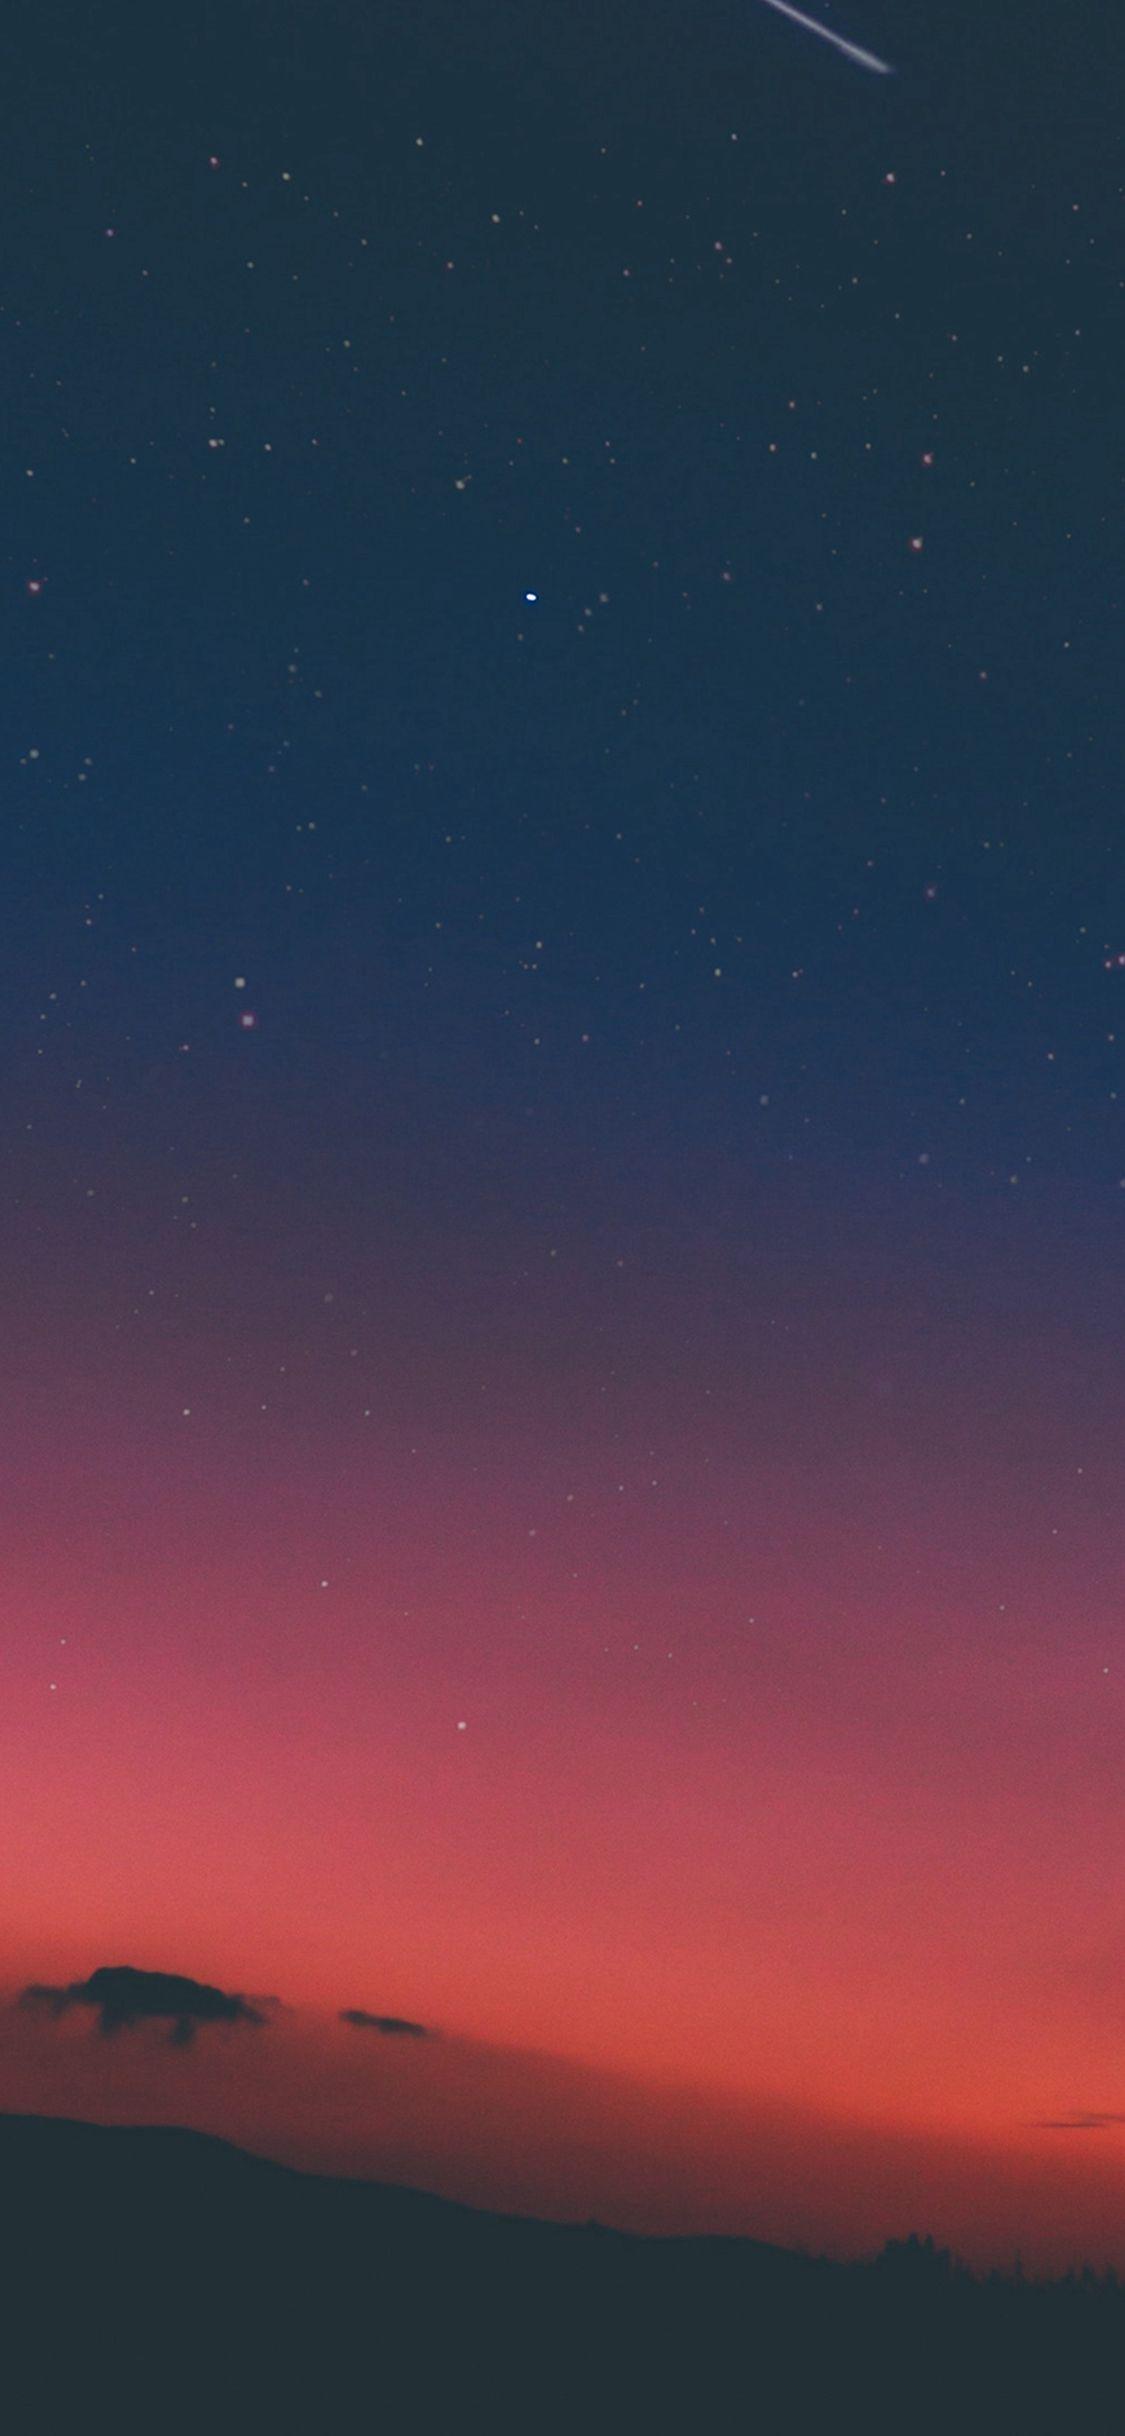 Night Sky Sunset Pink Nature iPhone X Wallpaper Download. iPhone